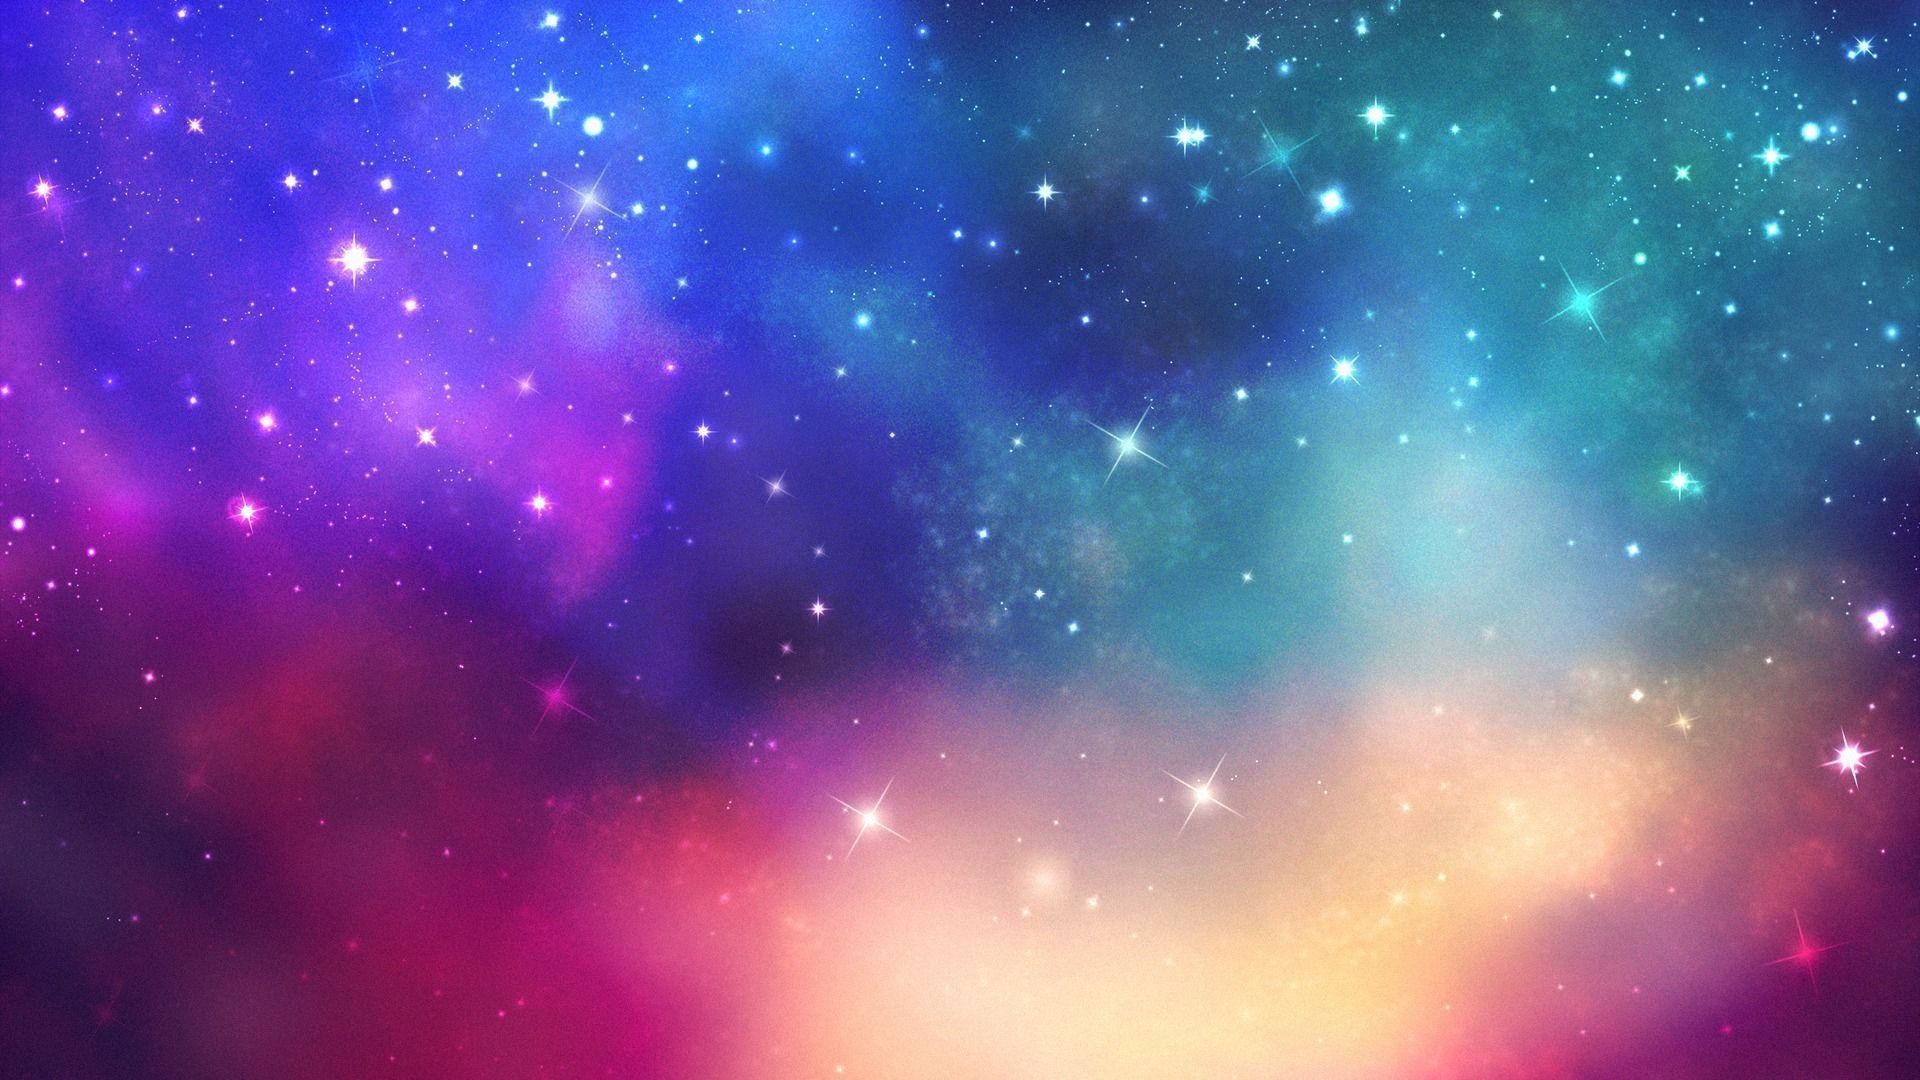 1920x1080 Photography : Space Stars Wallpaper Tumblr Pictures HD Wallpapers .